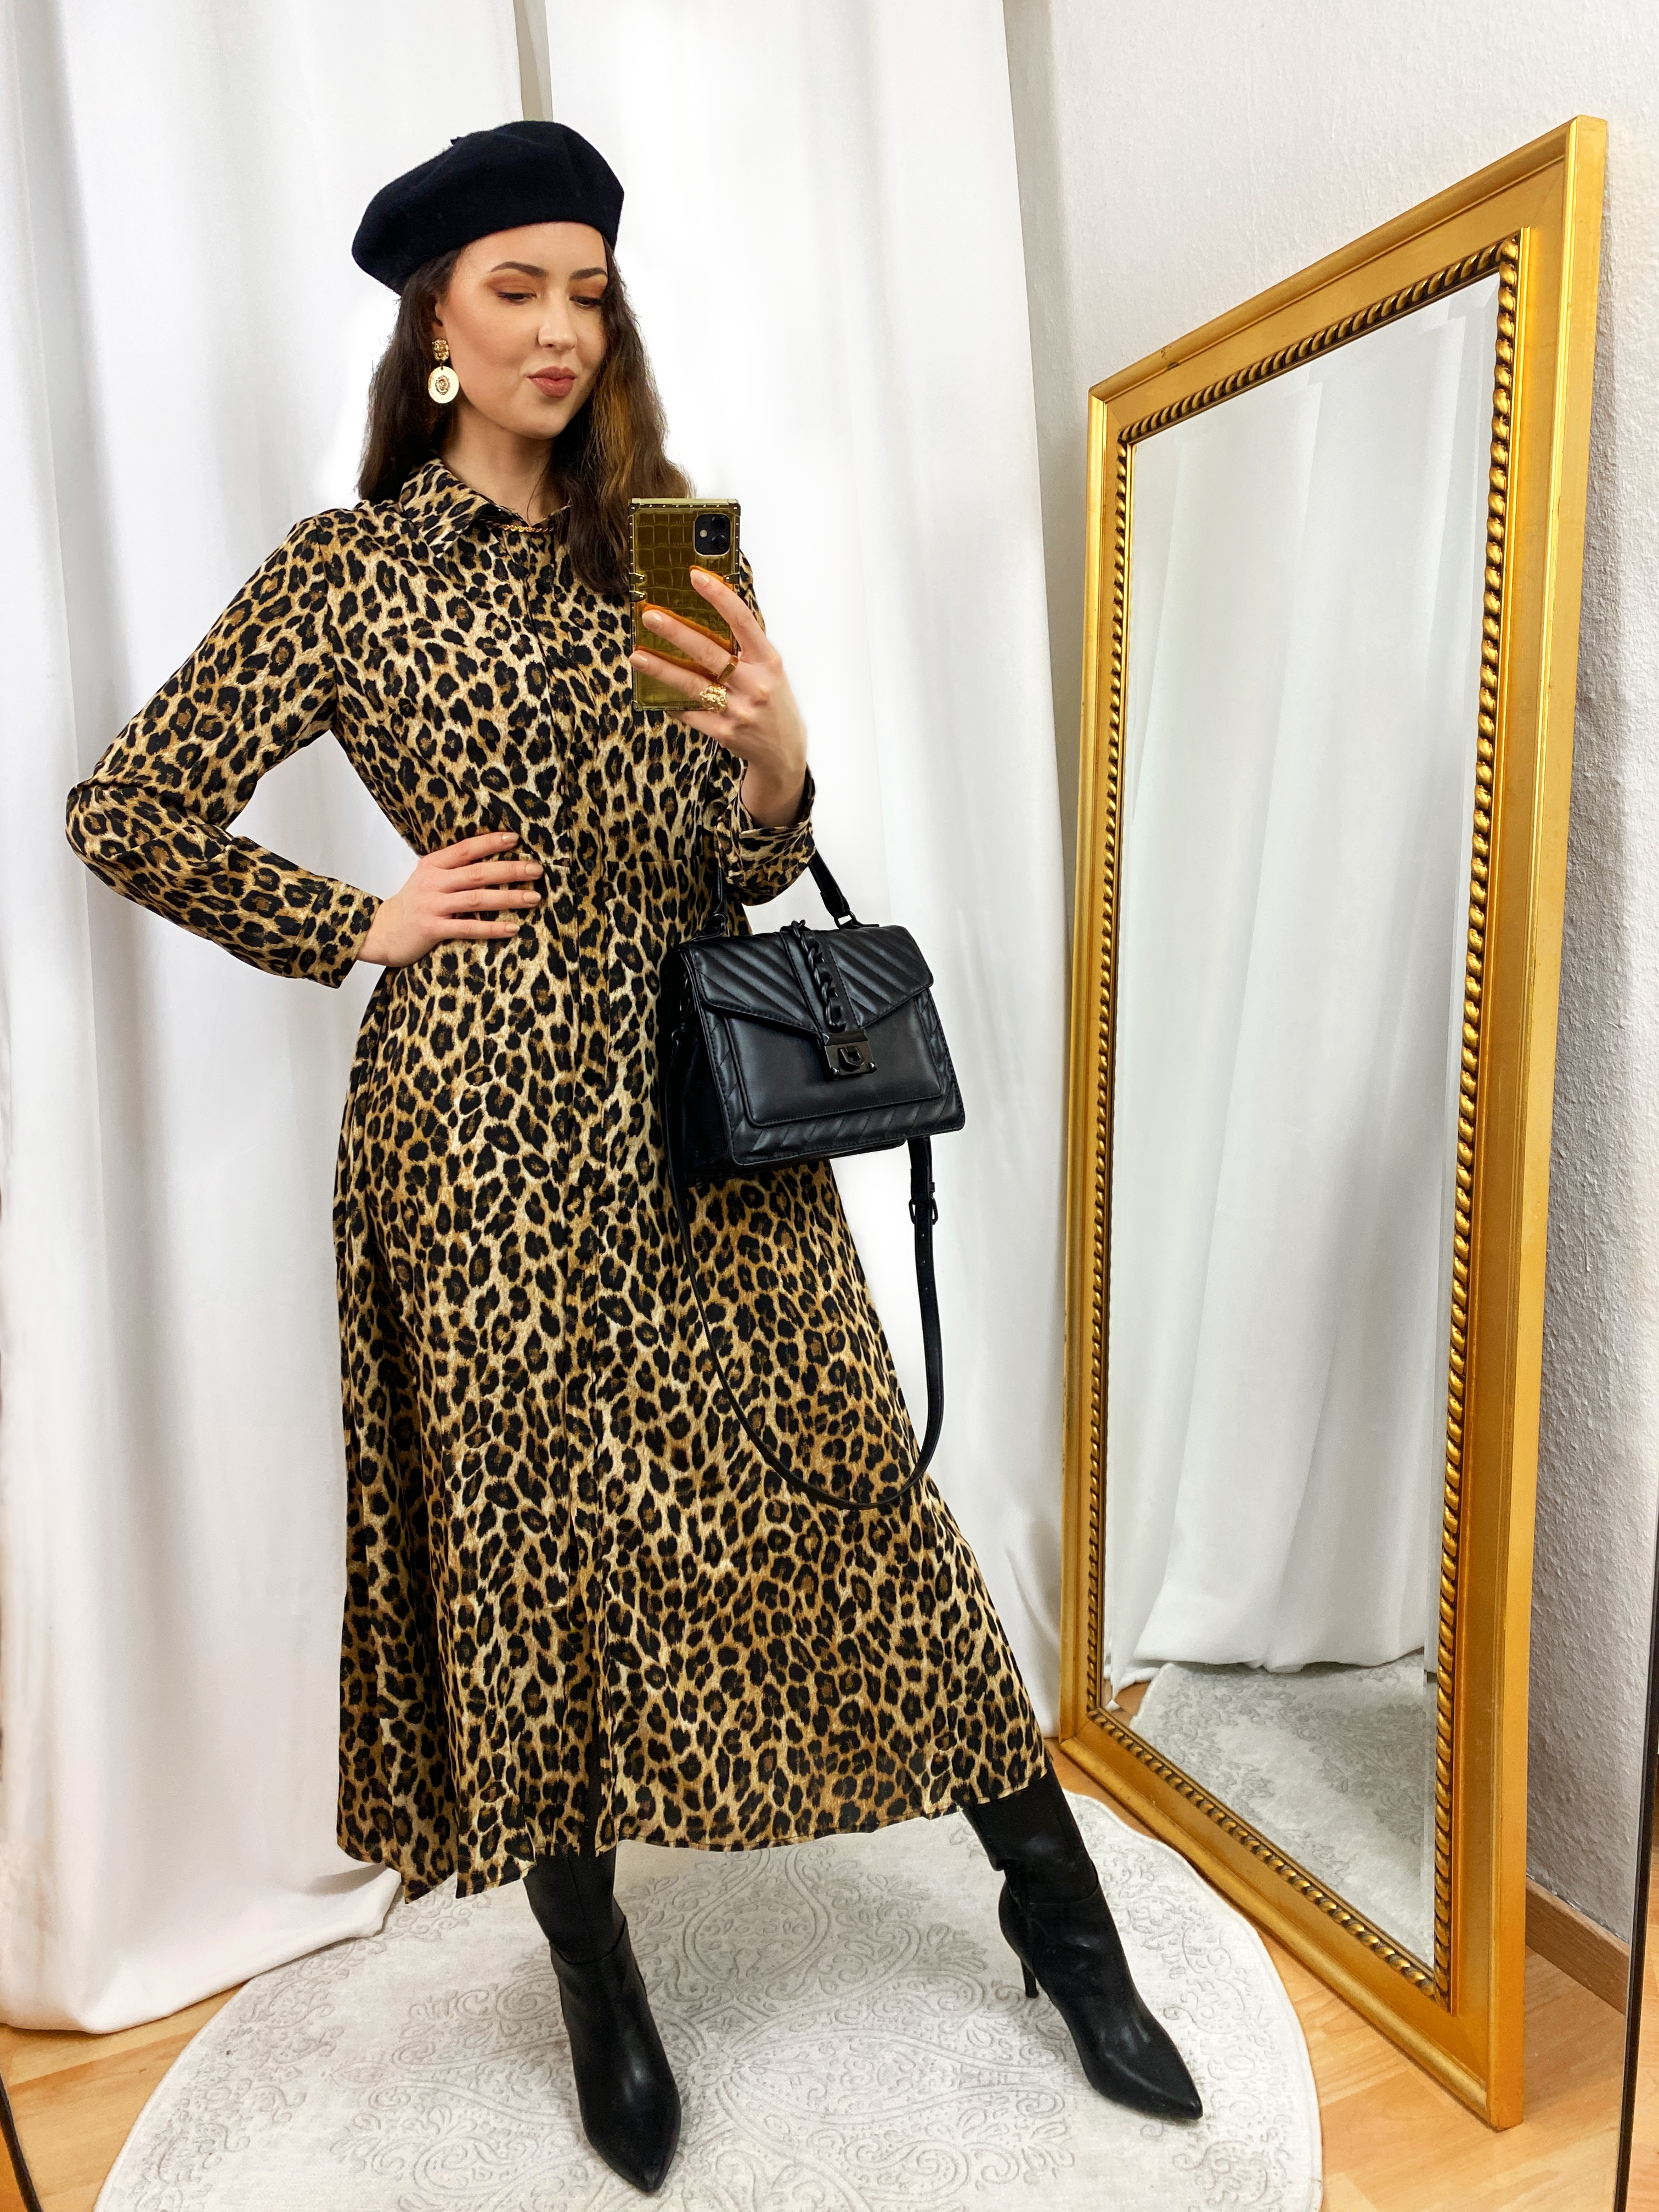 Leopard Dress and Black Boots Outfit